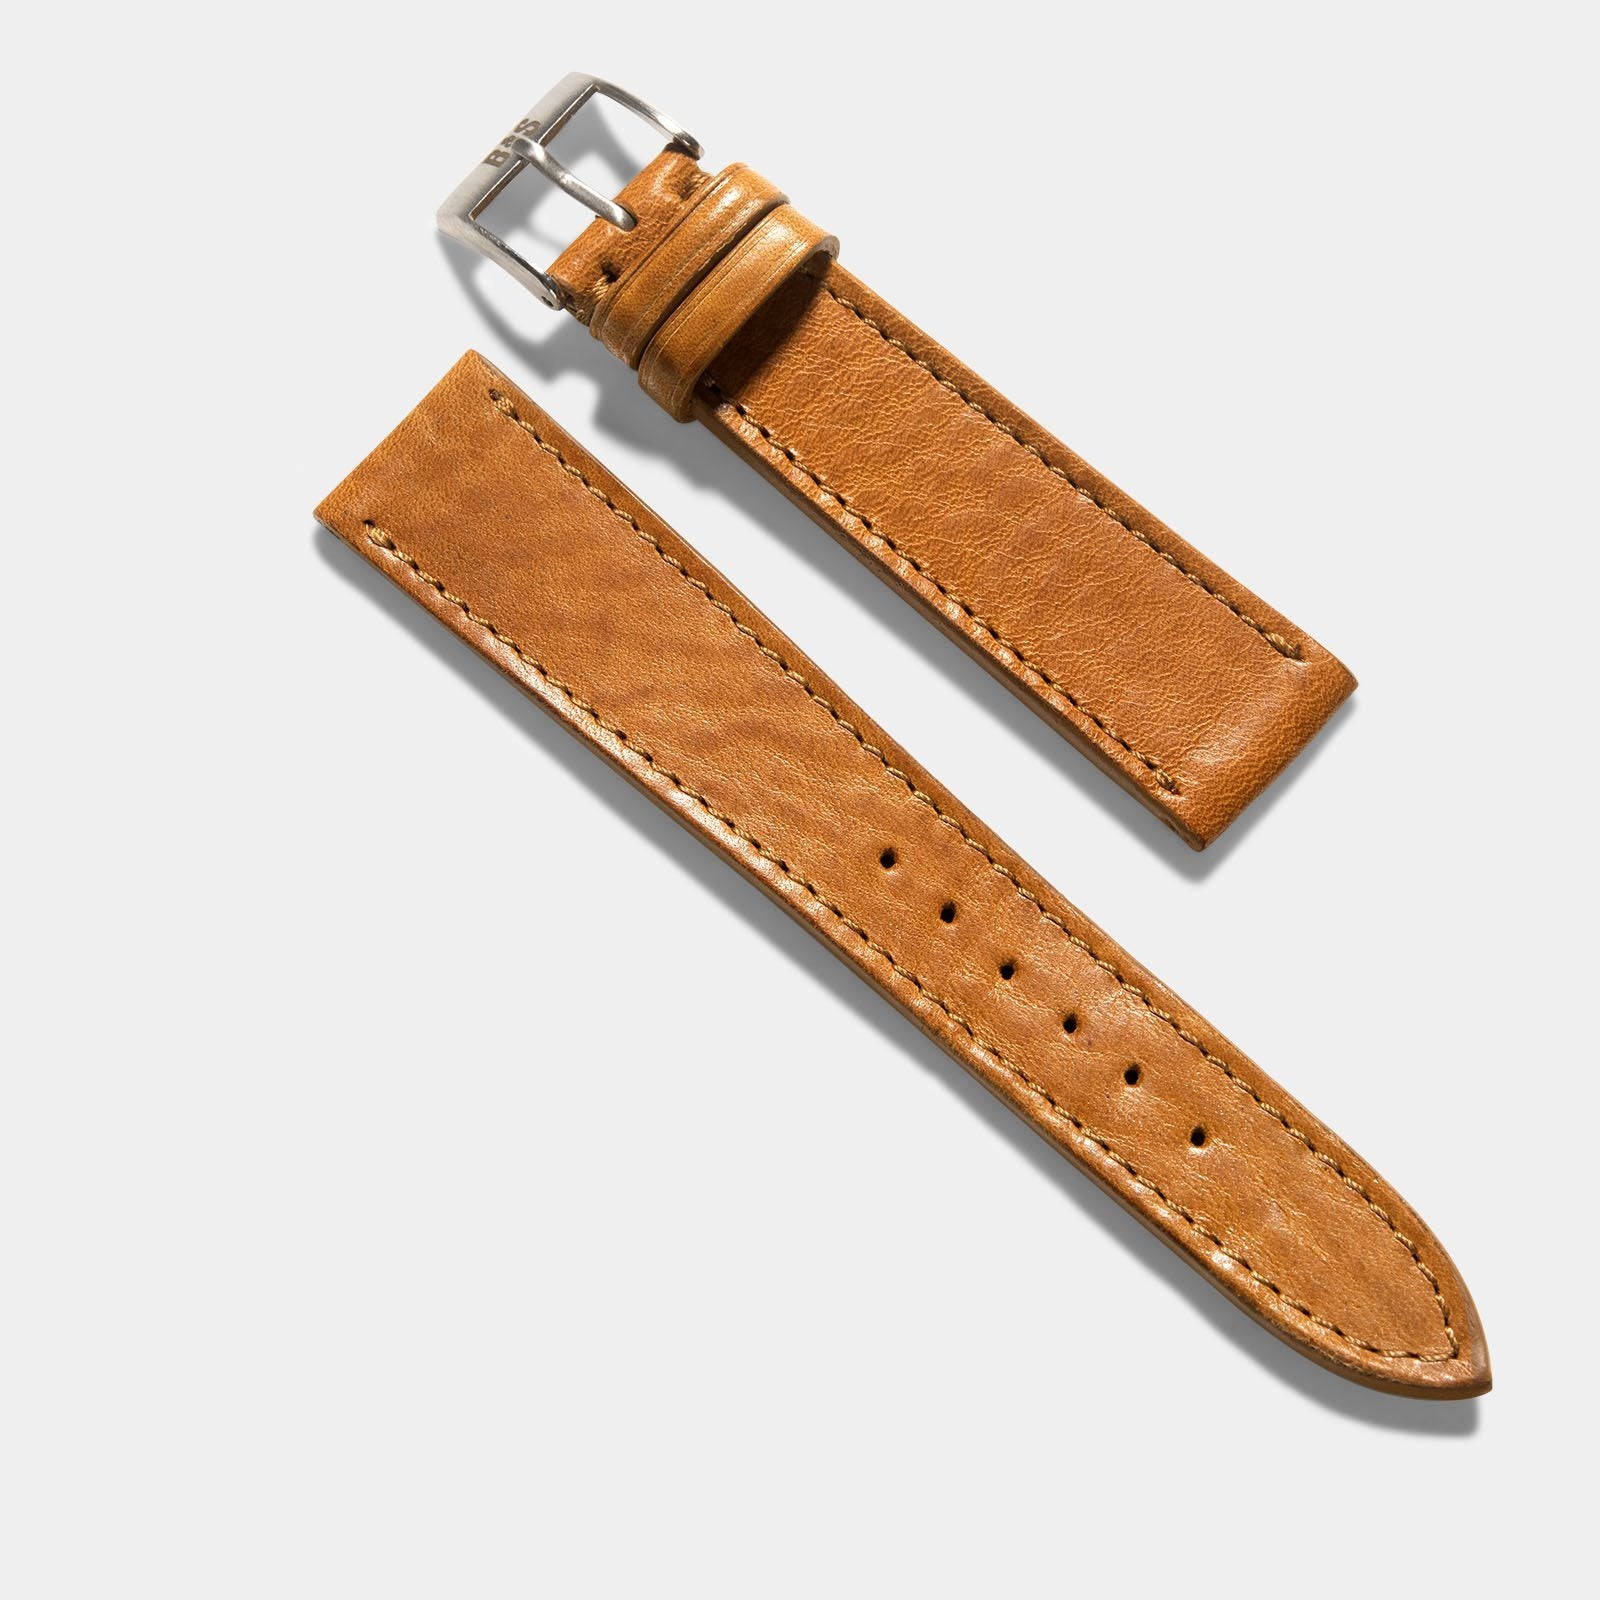 Tambour Epi Leather Strap - Watches - Traditional Watches